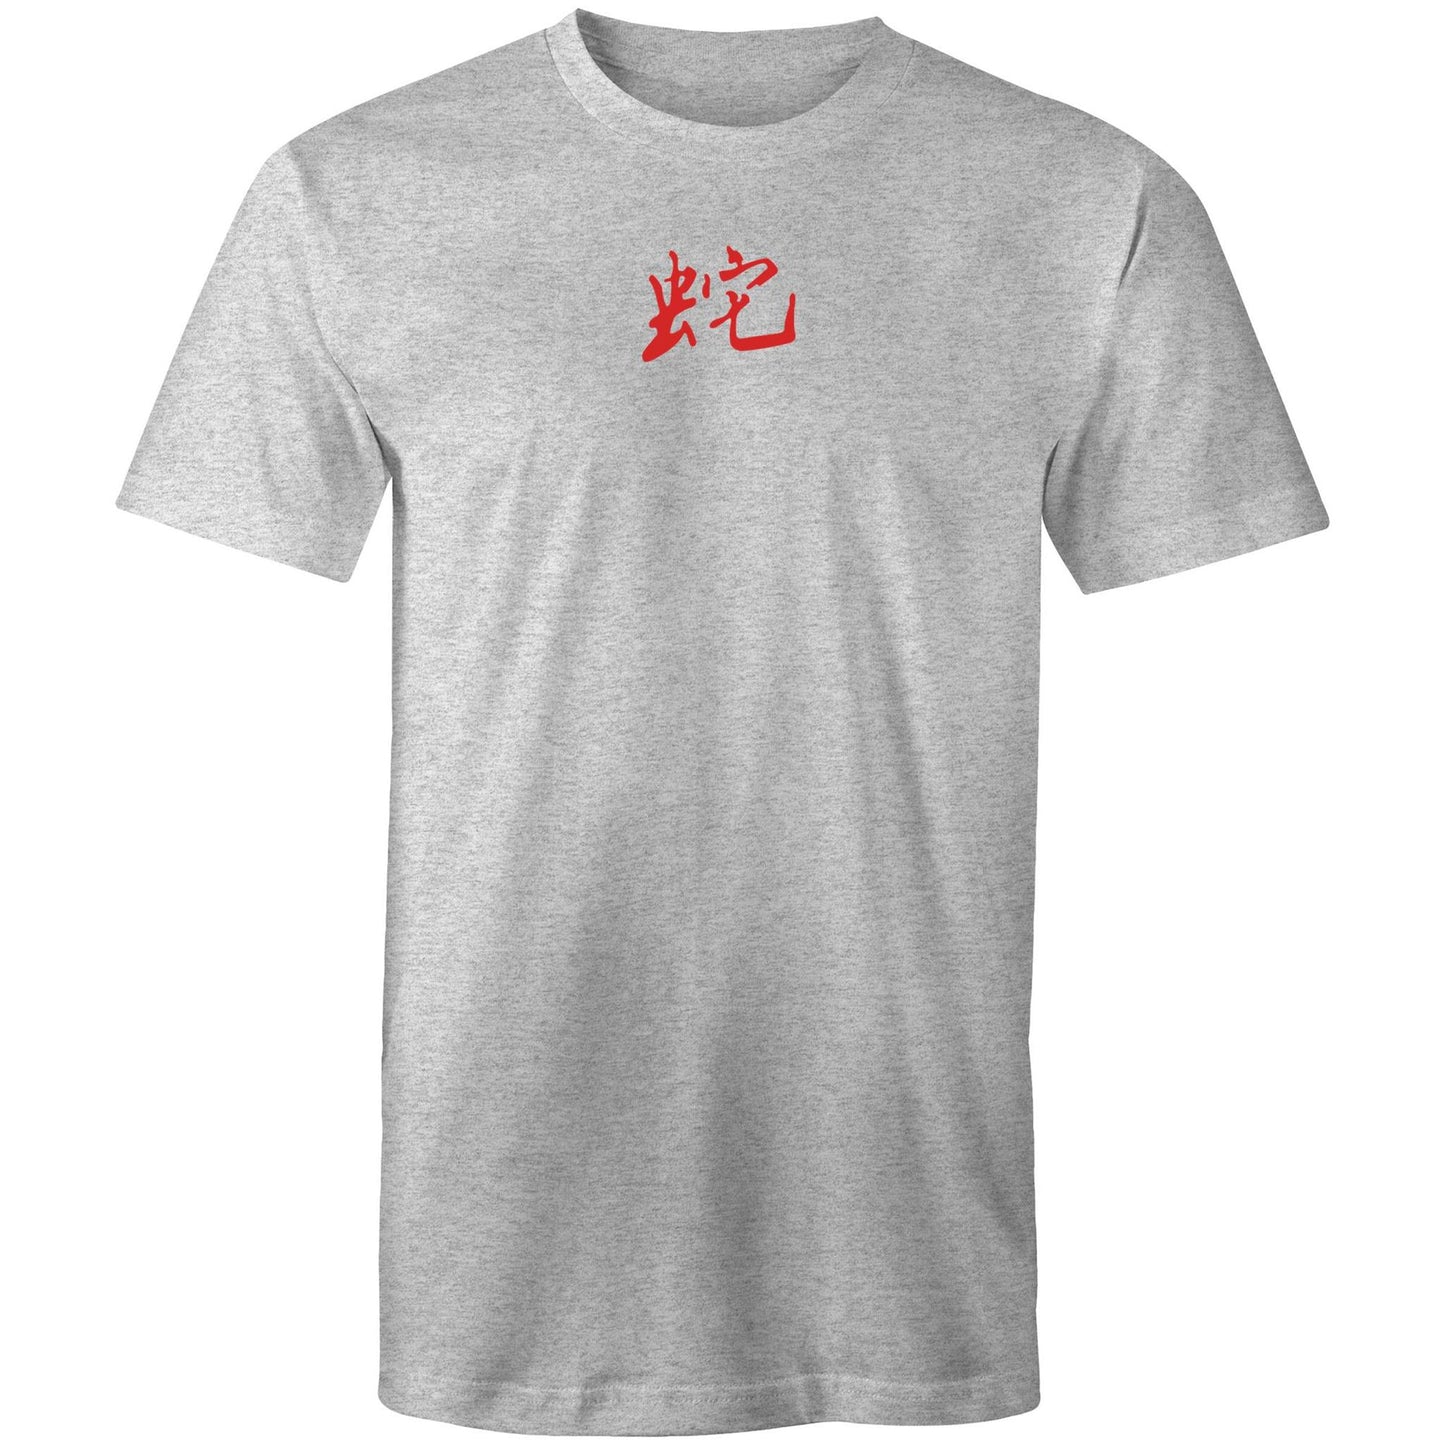 Year of the Snake T Shirts for Men (Unisex)